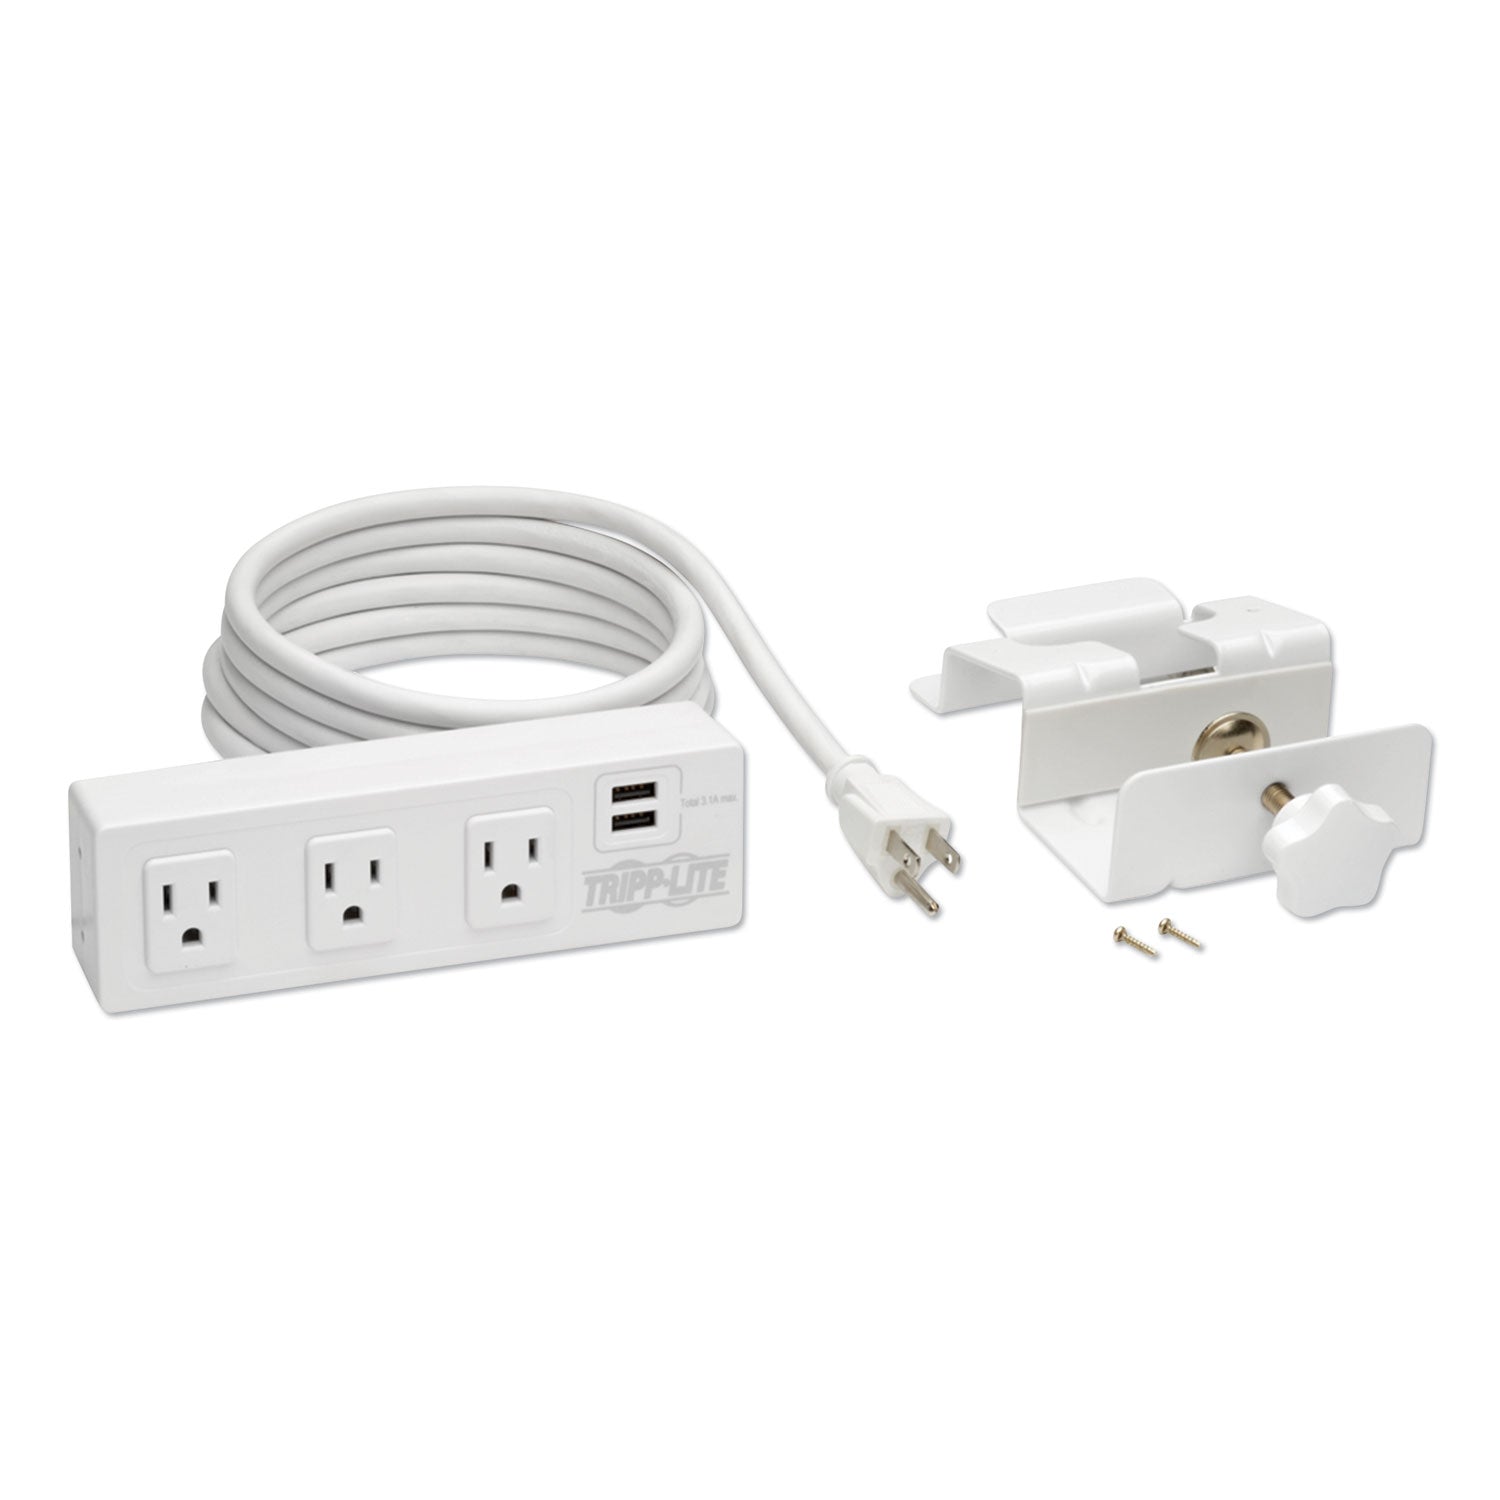 surge-protector-3-ac-outlets-2-usb-ports-10-ft-cord-510-j-white_trptlp310usbcw - 2